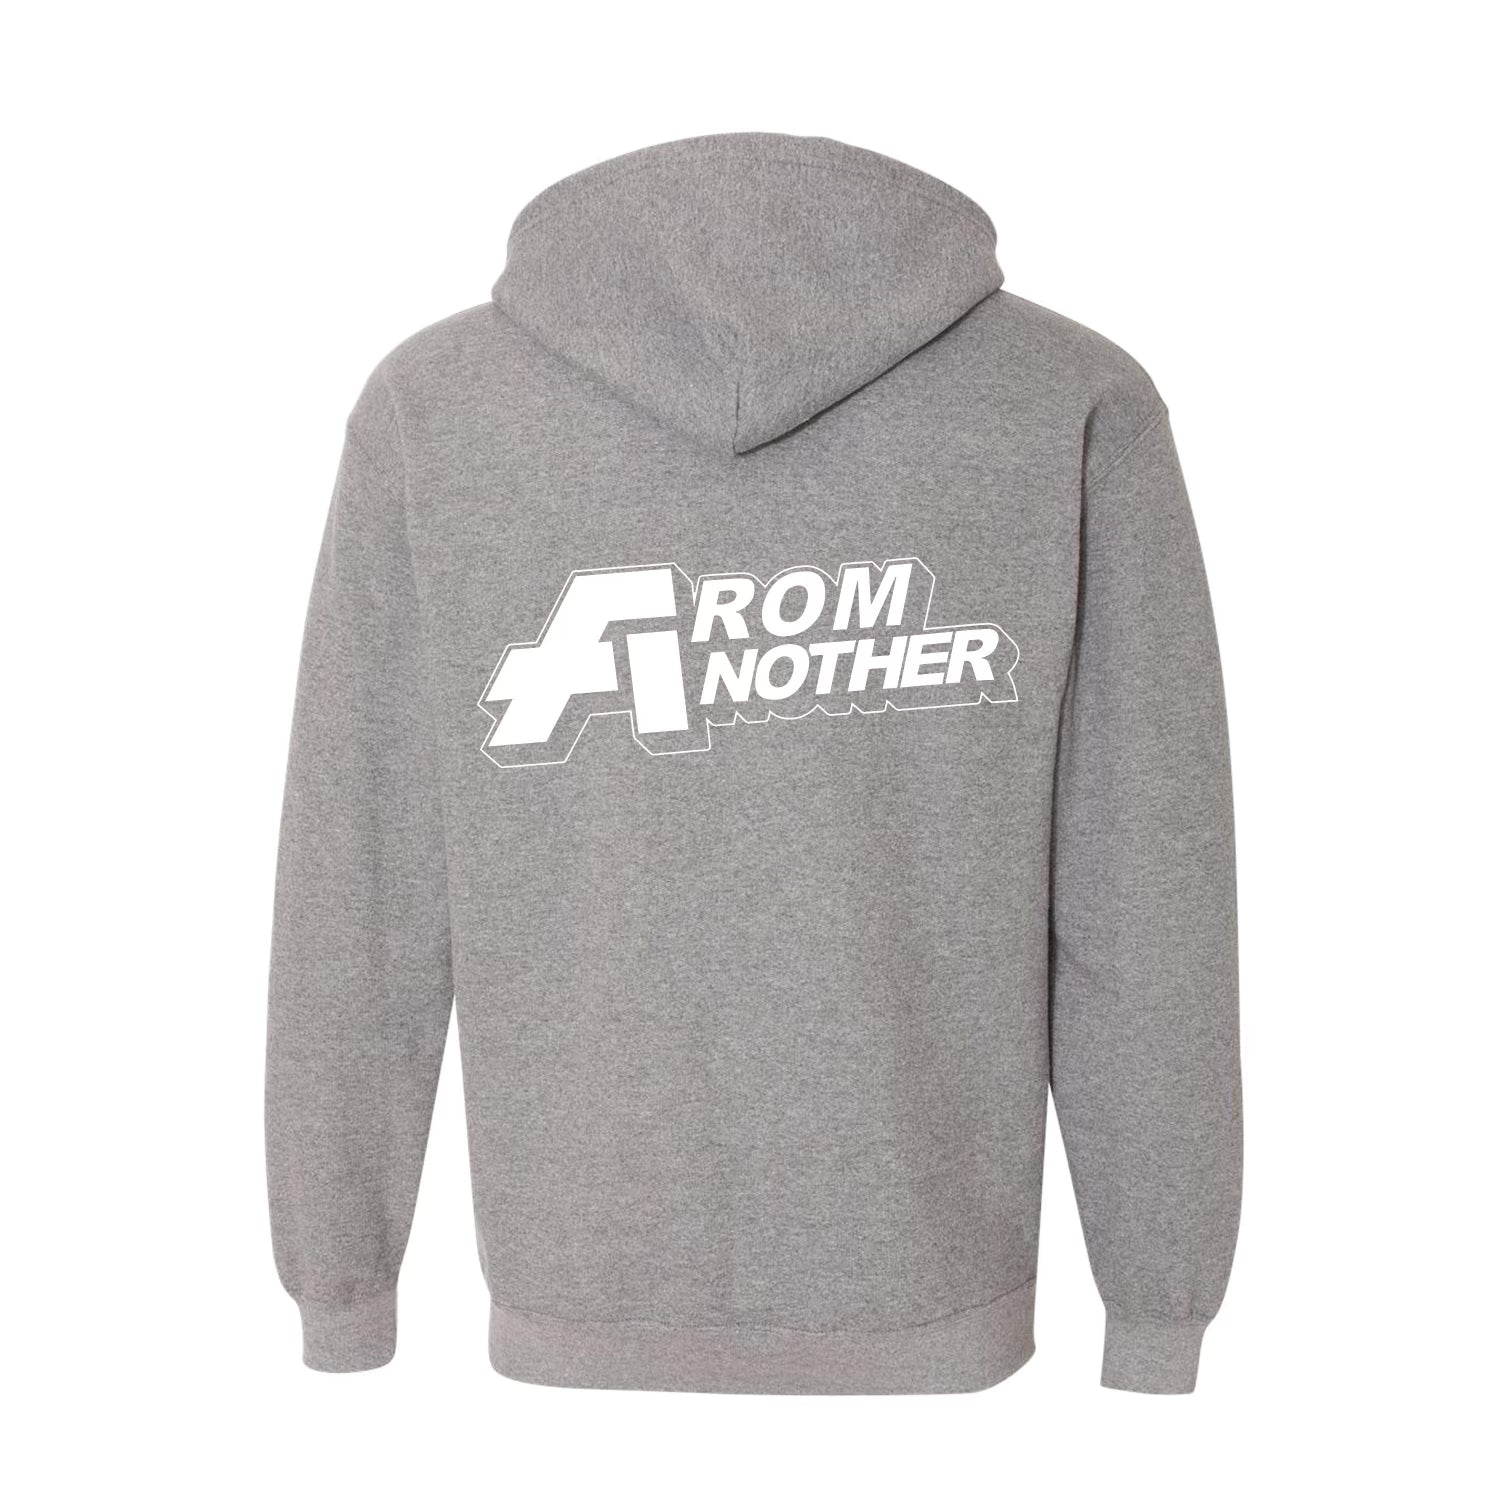 From Another Shop Hoodie Grey